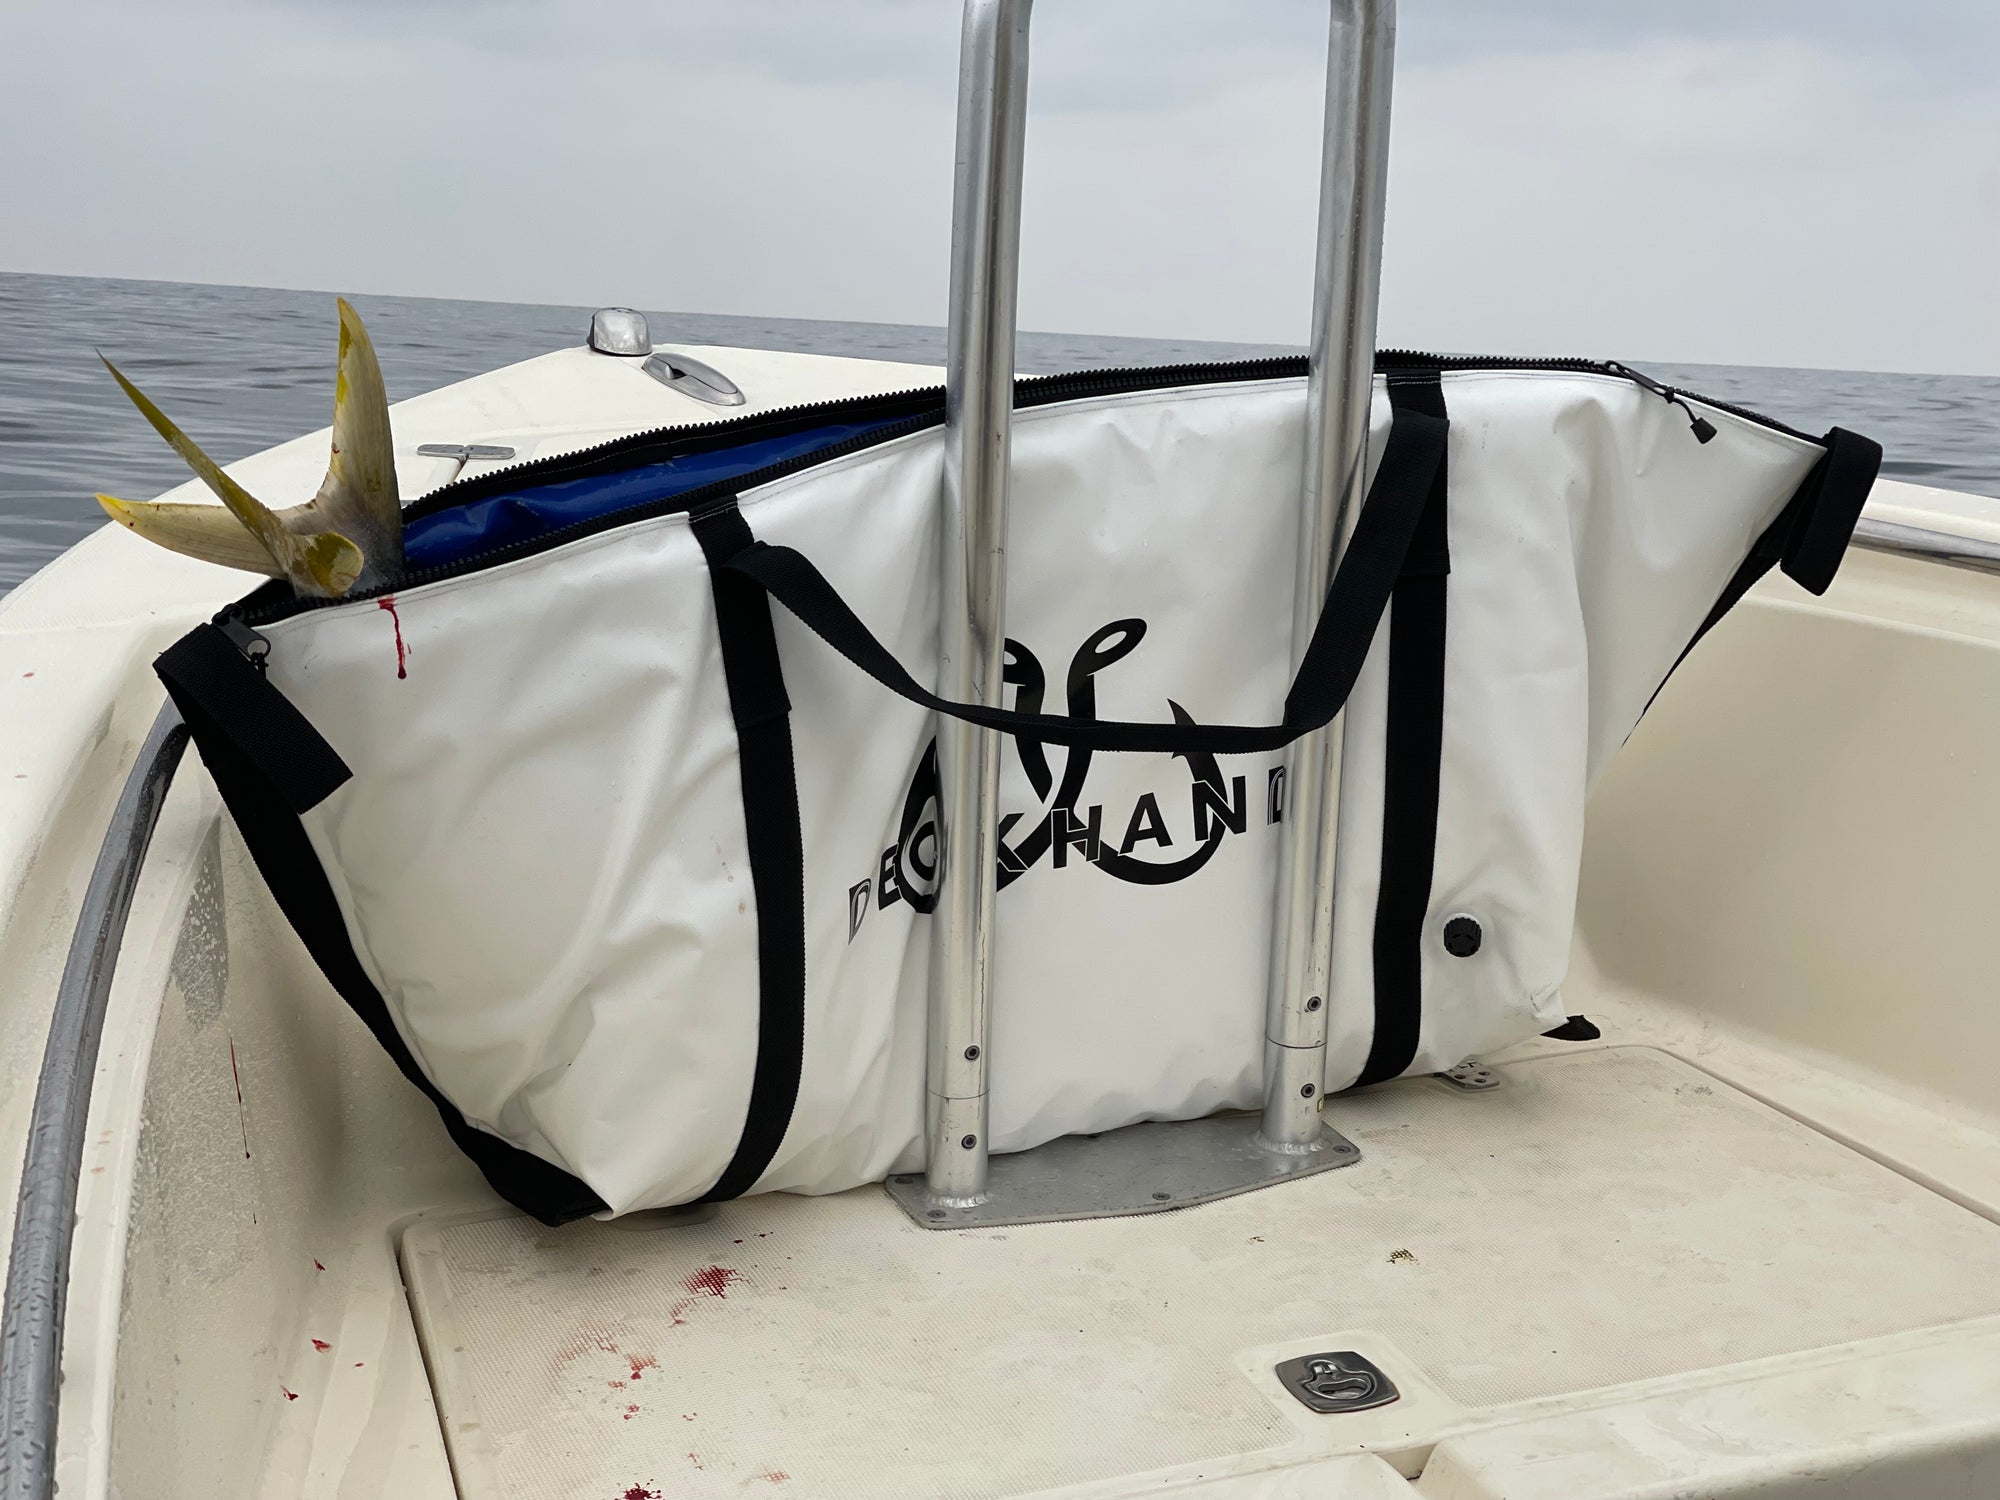 48" Fish Kill Bag - Yellow Tail in the Deckhand bag